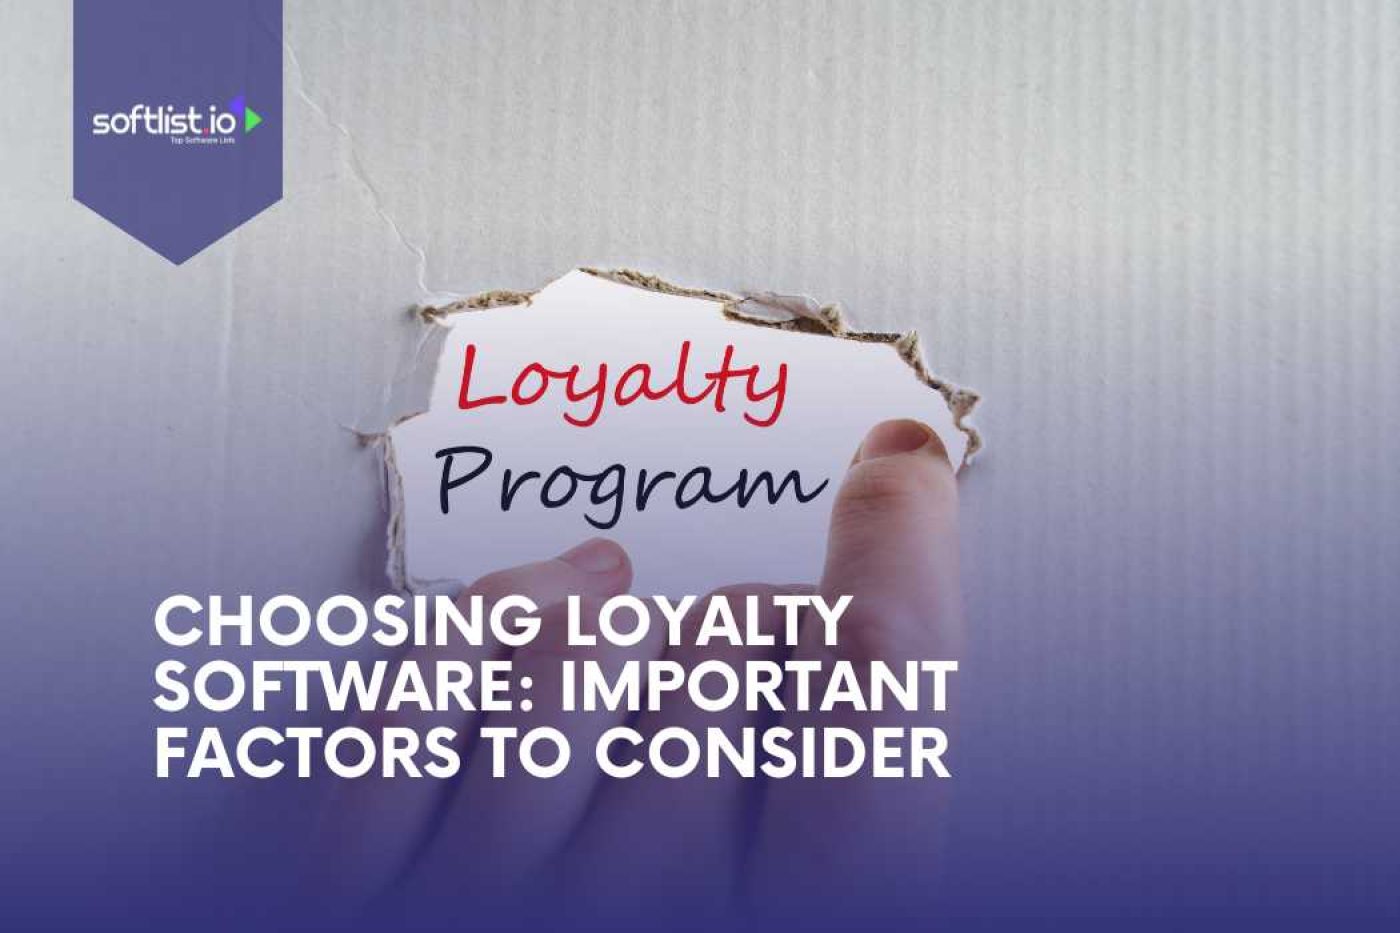 Choosing Loyalty Software Important Factors to Consider